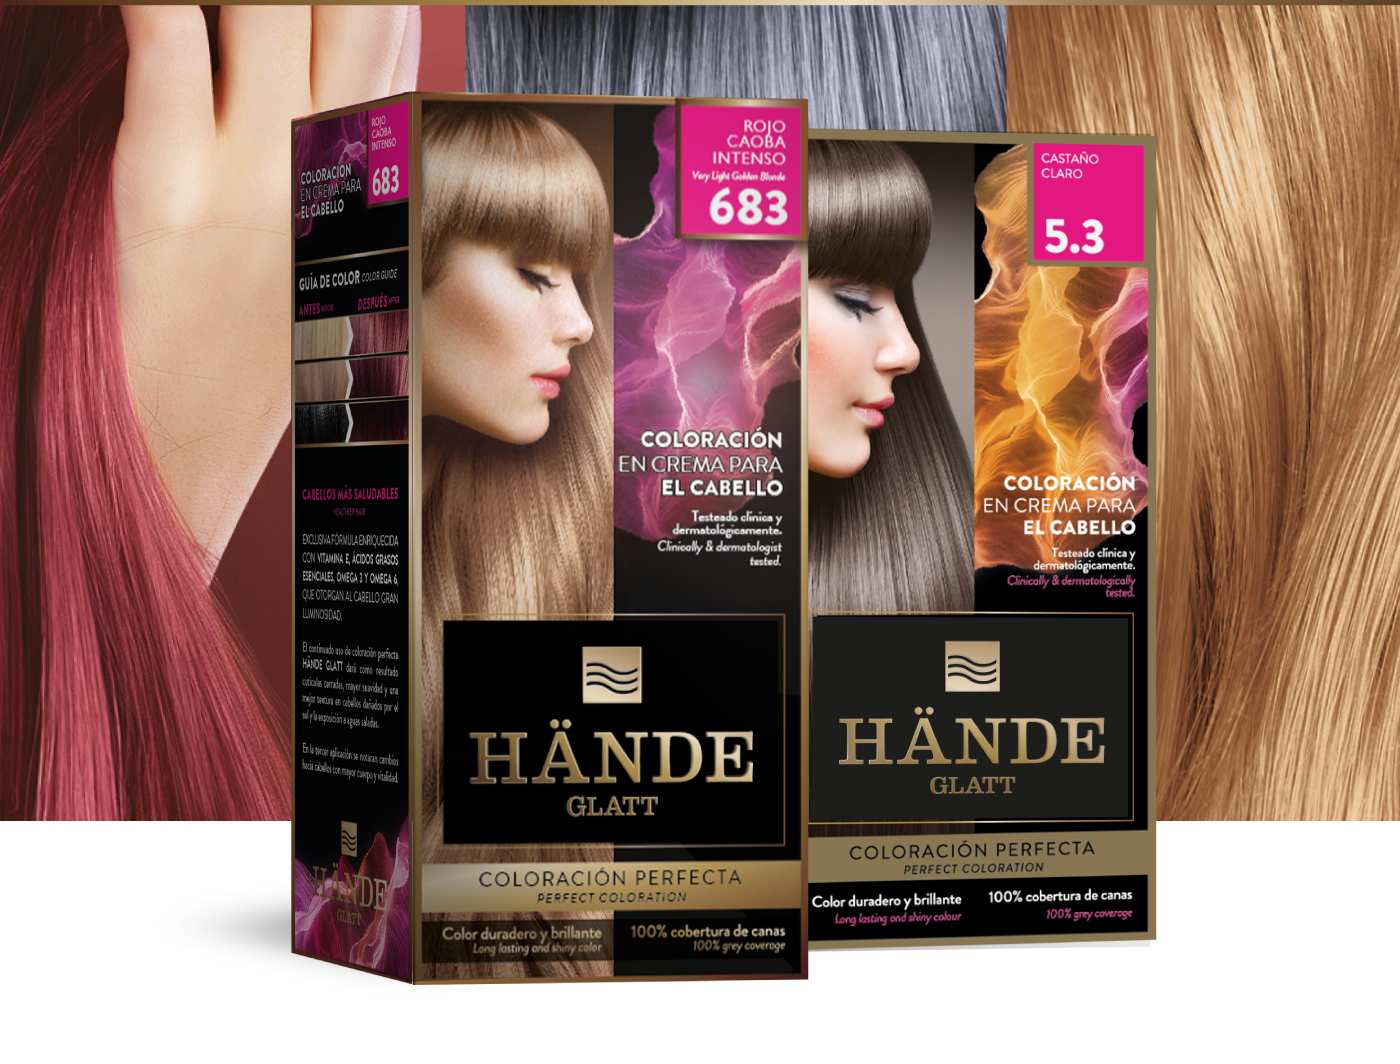 color hair beautycare hairsandstyles styles beauty woman colorhair